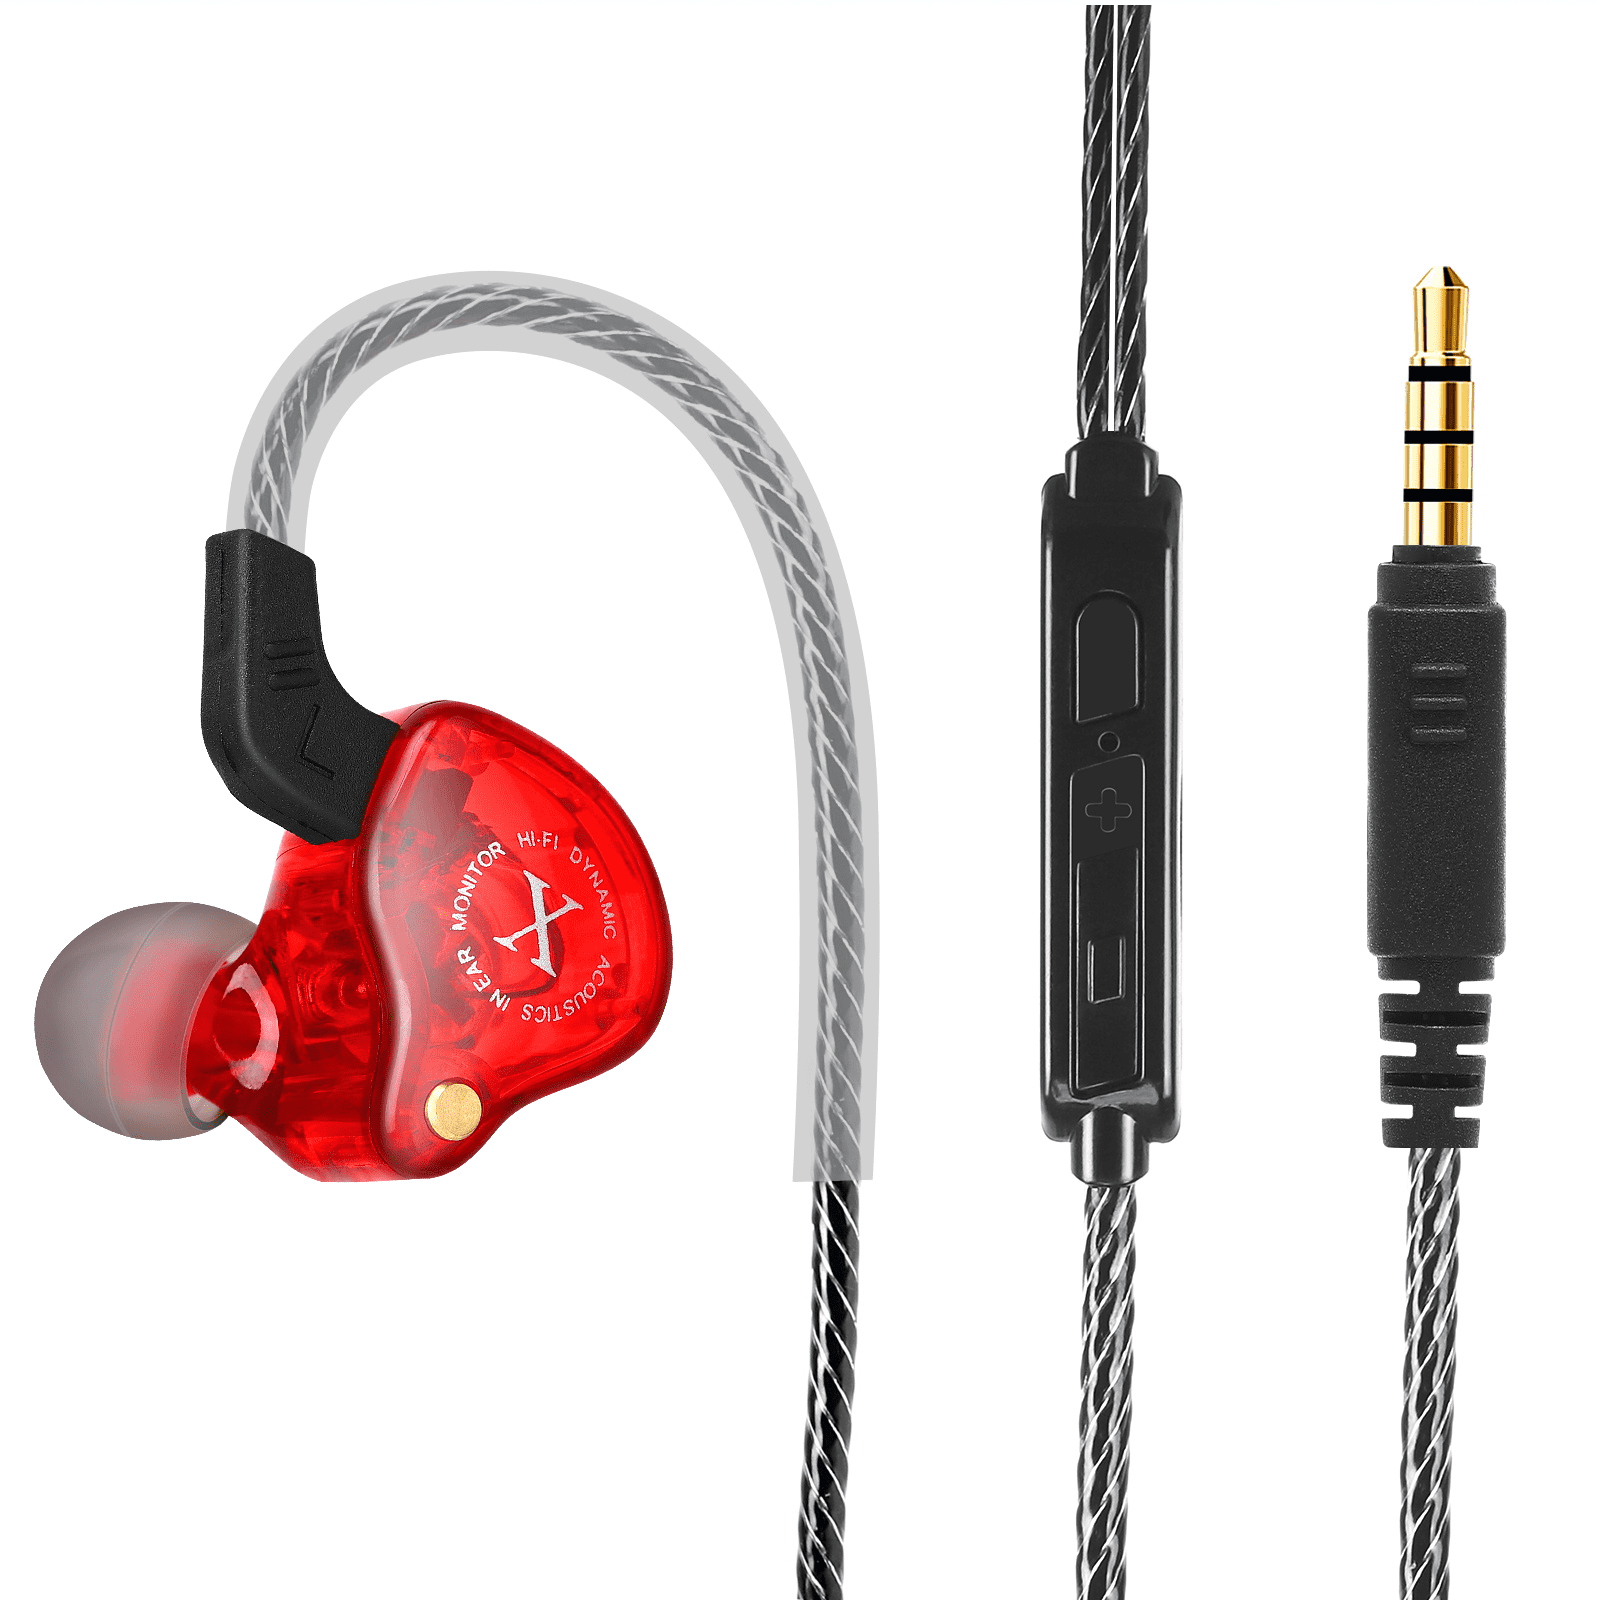 UrbanX iX2 Pro Dynamic Hybrid Dual Driver in Ear Musicians Earphones With Mic Tangle-Free Cable in-Ear Earbuds Headphones For Acer Chromebook Tab 10